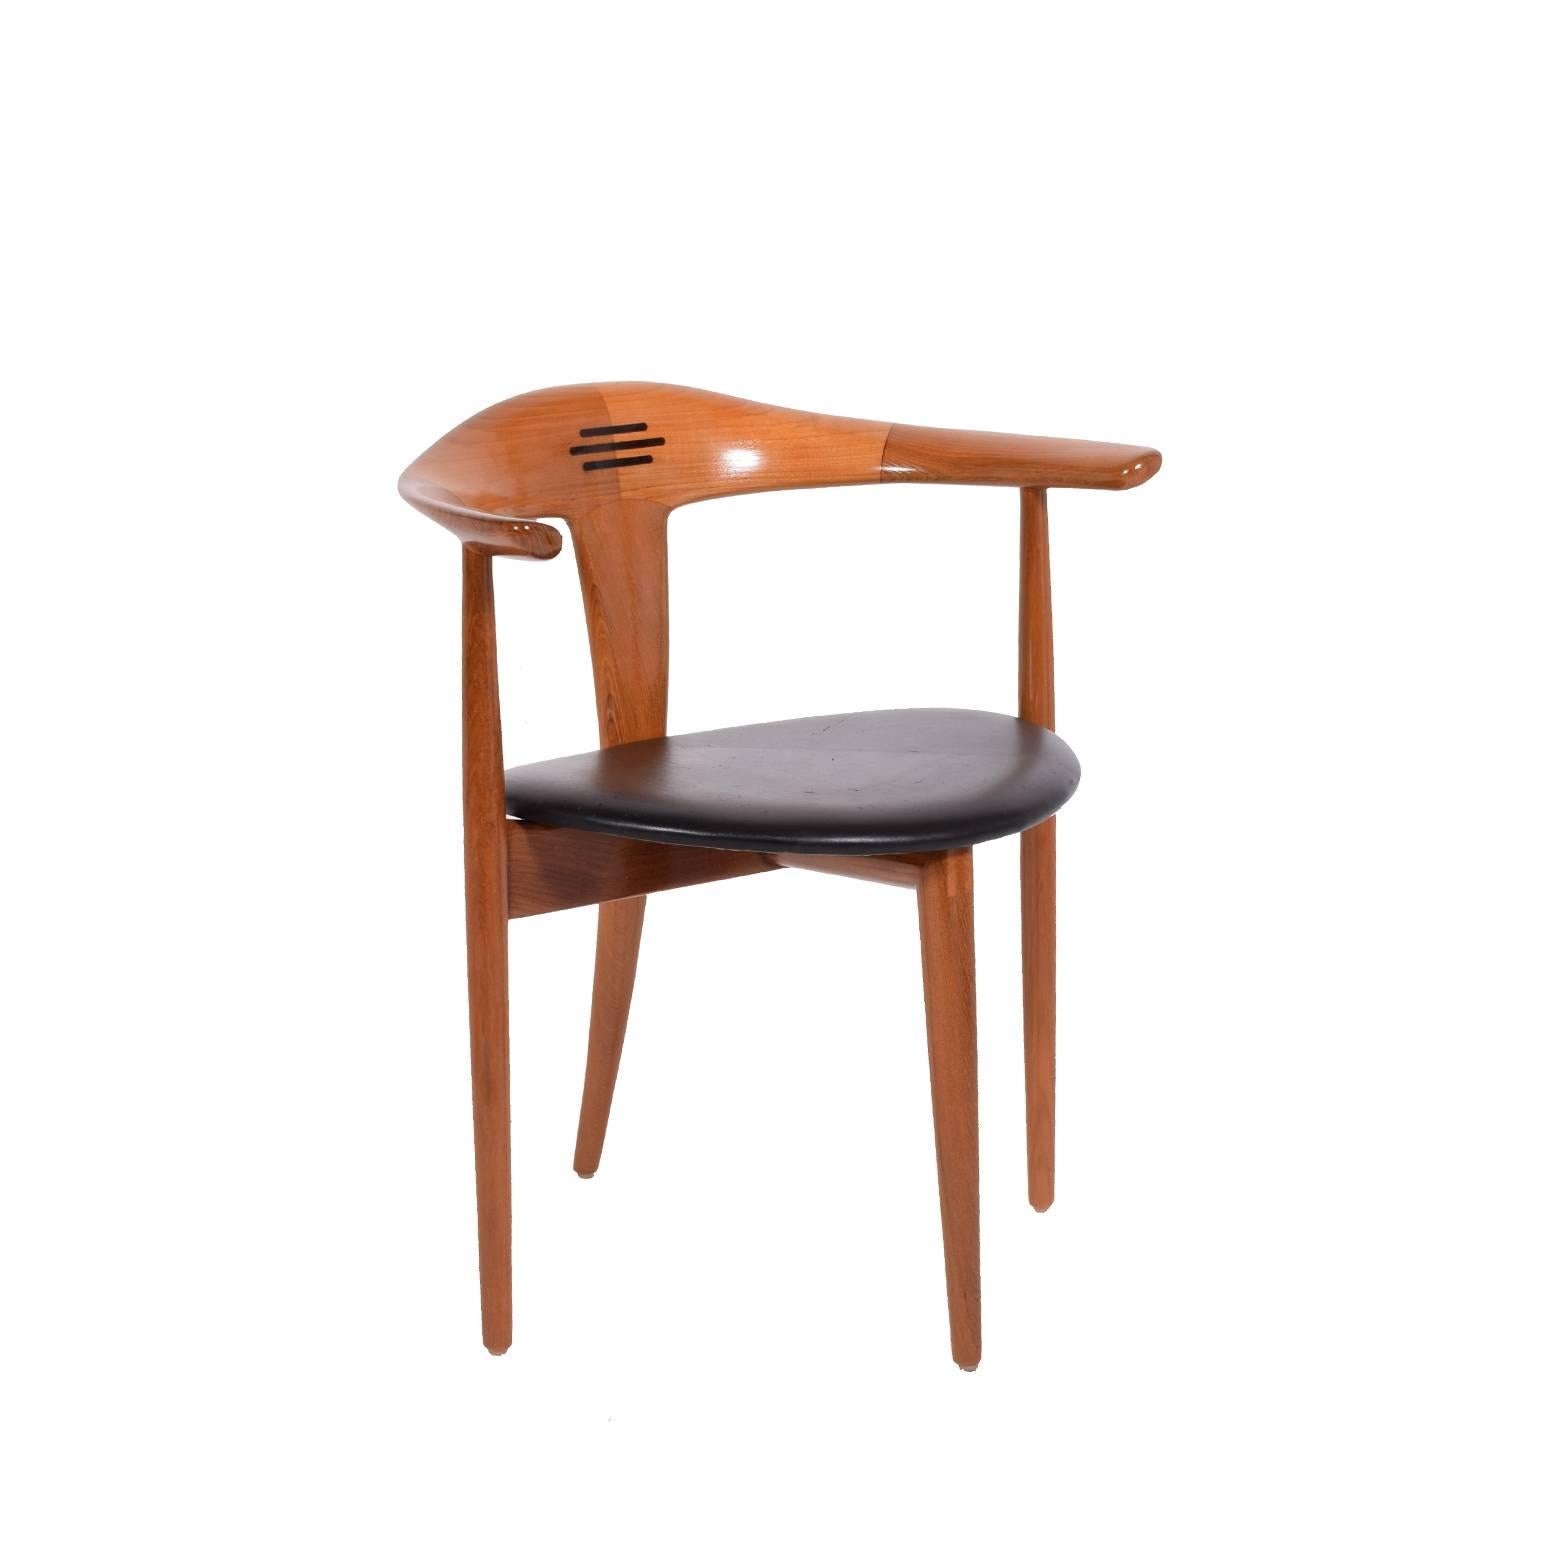 Solid teak armchair designed in 1962. Inlaid design at back of chair connection. Marked Randers Møbelfabrik and Danish quality control. Has U.S. Patent from May 21, 1963 from Andersen and Pedersen assigning half the design to Moreddi Inc of Long